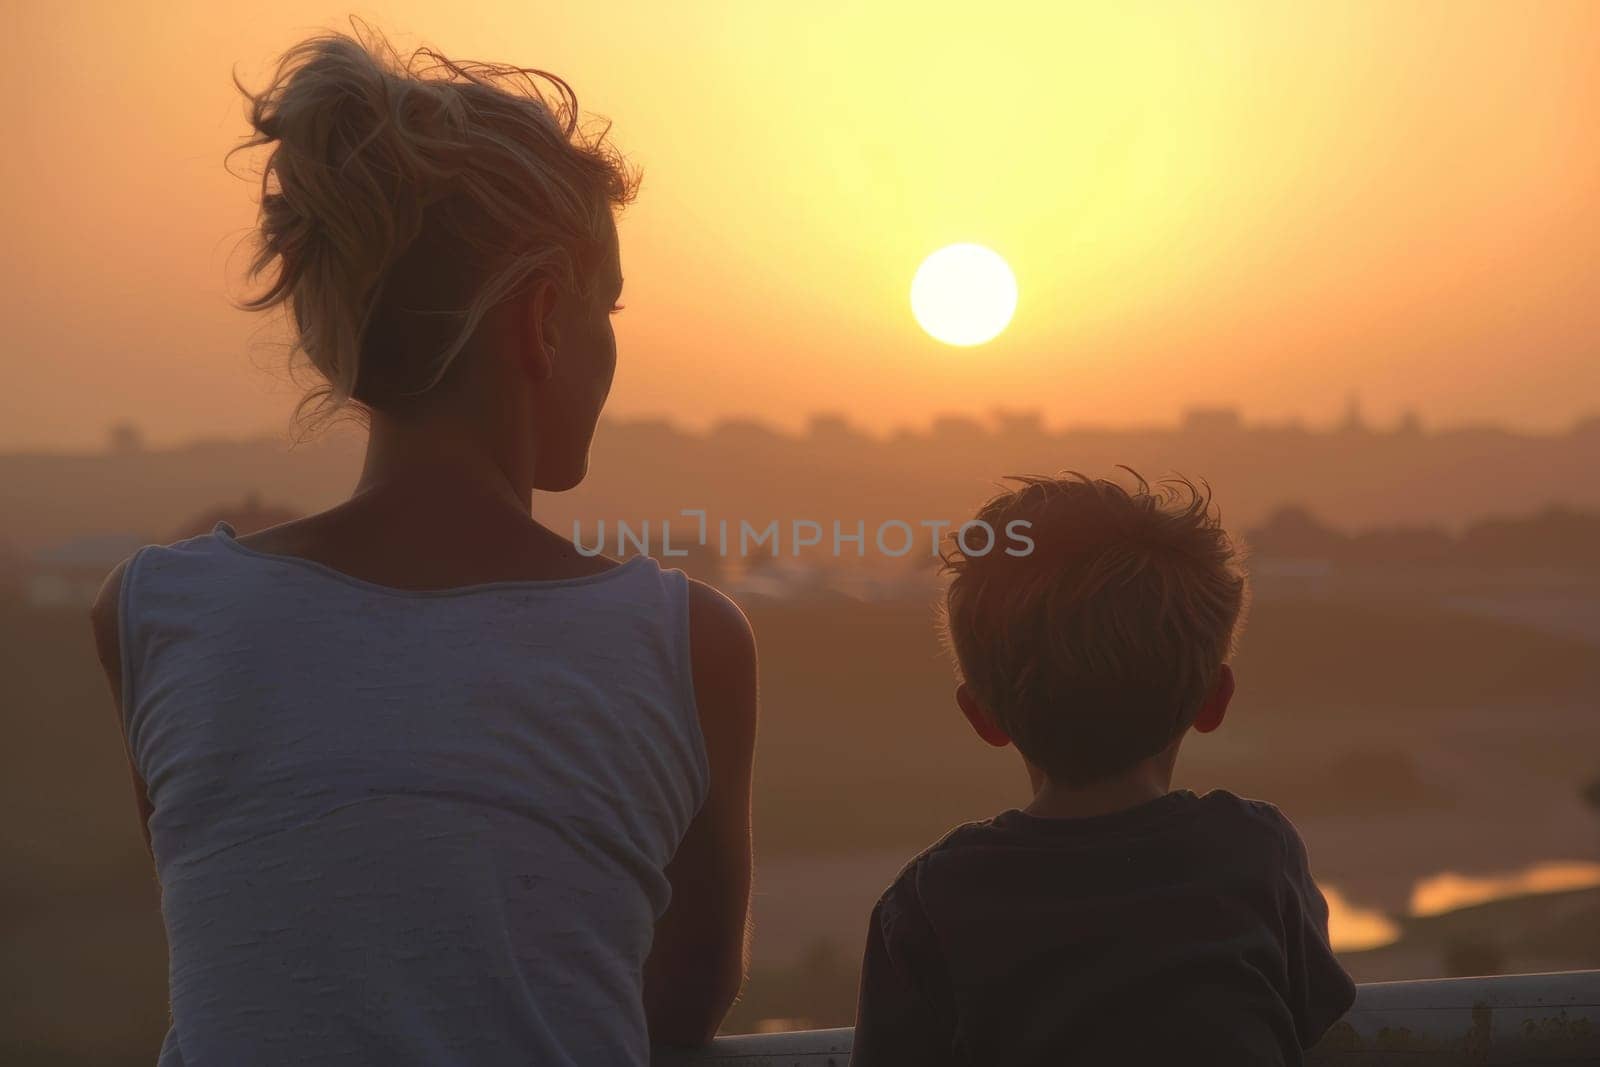 Mother and son watching sunset together, enjoying quality time and creating memories.